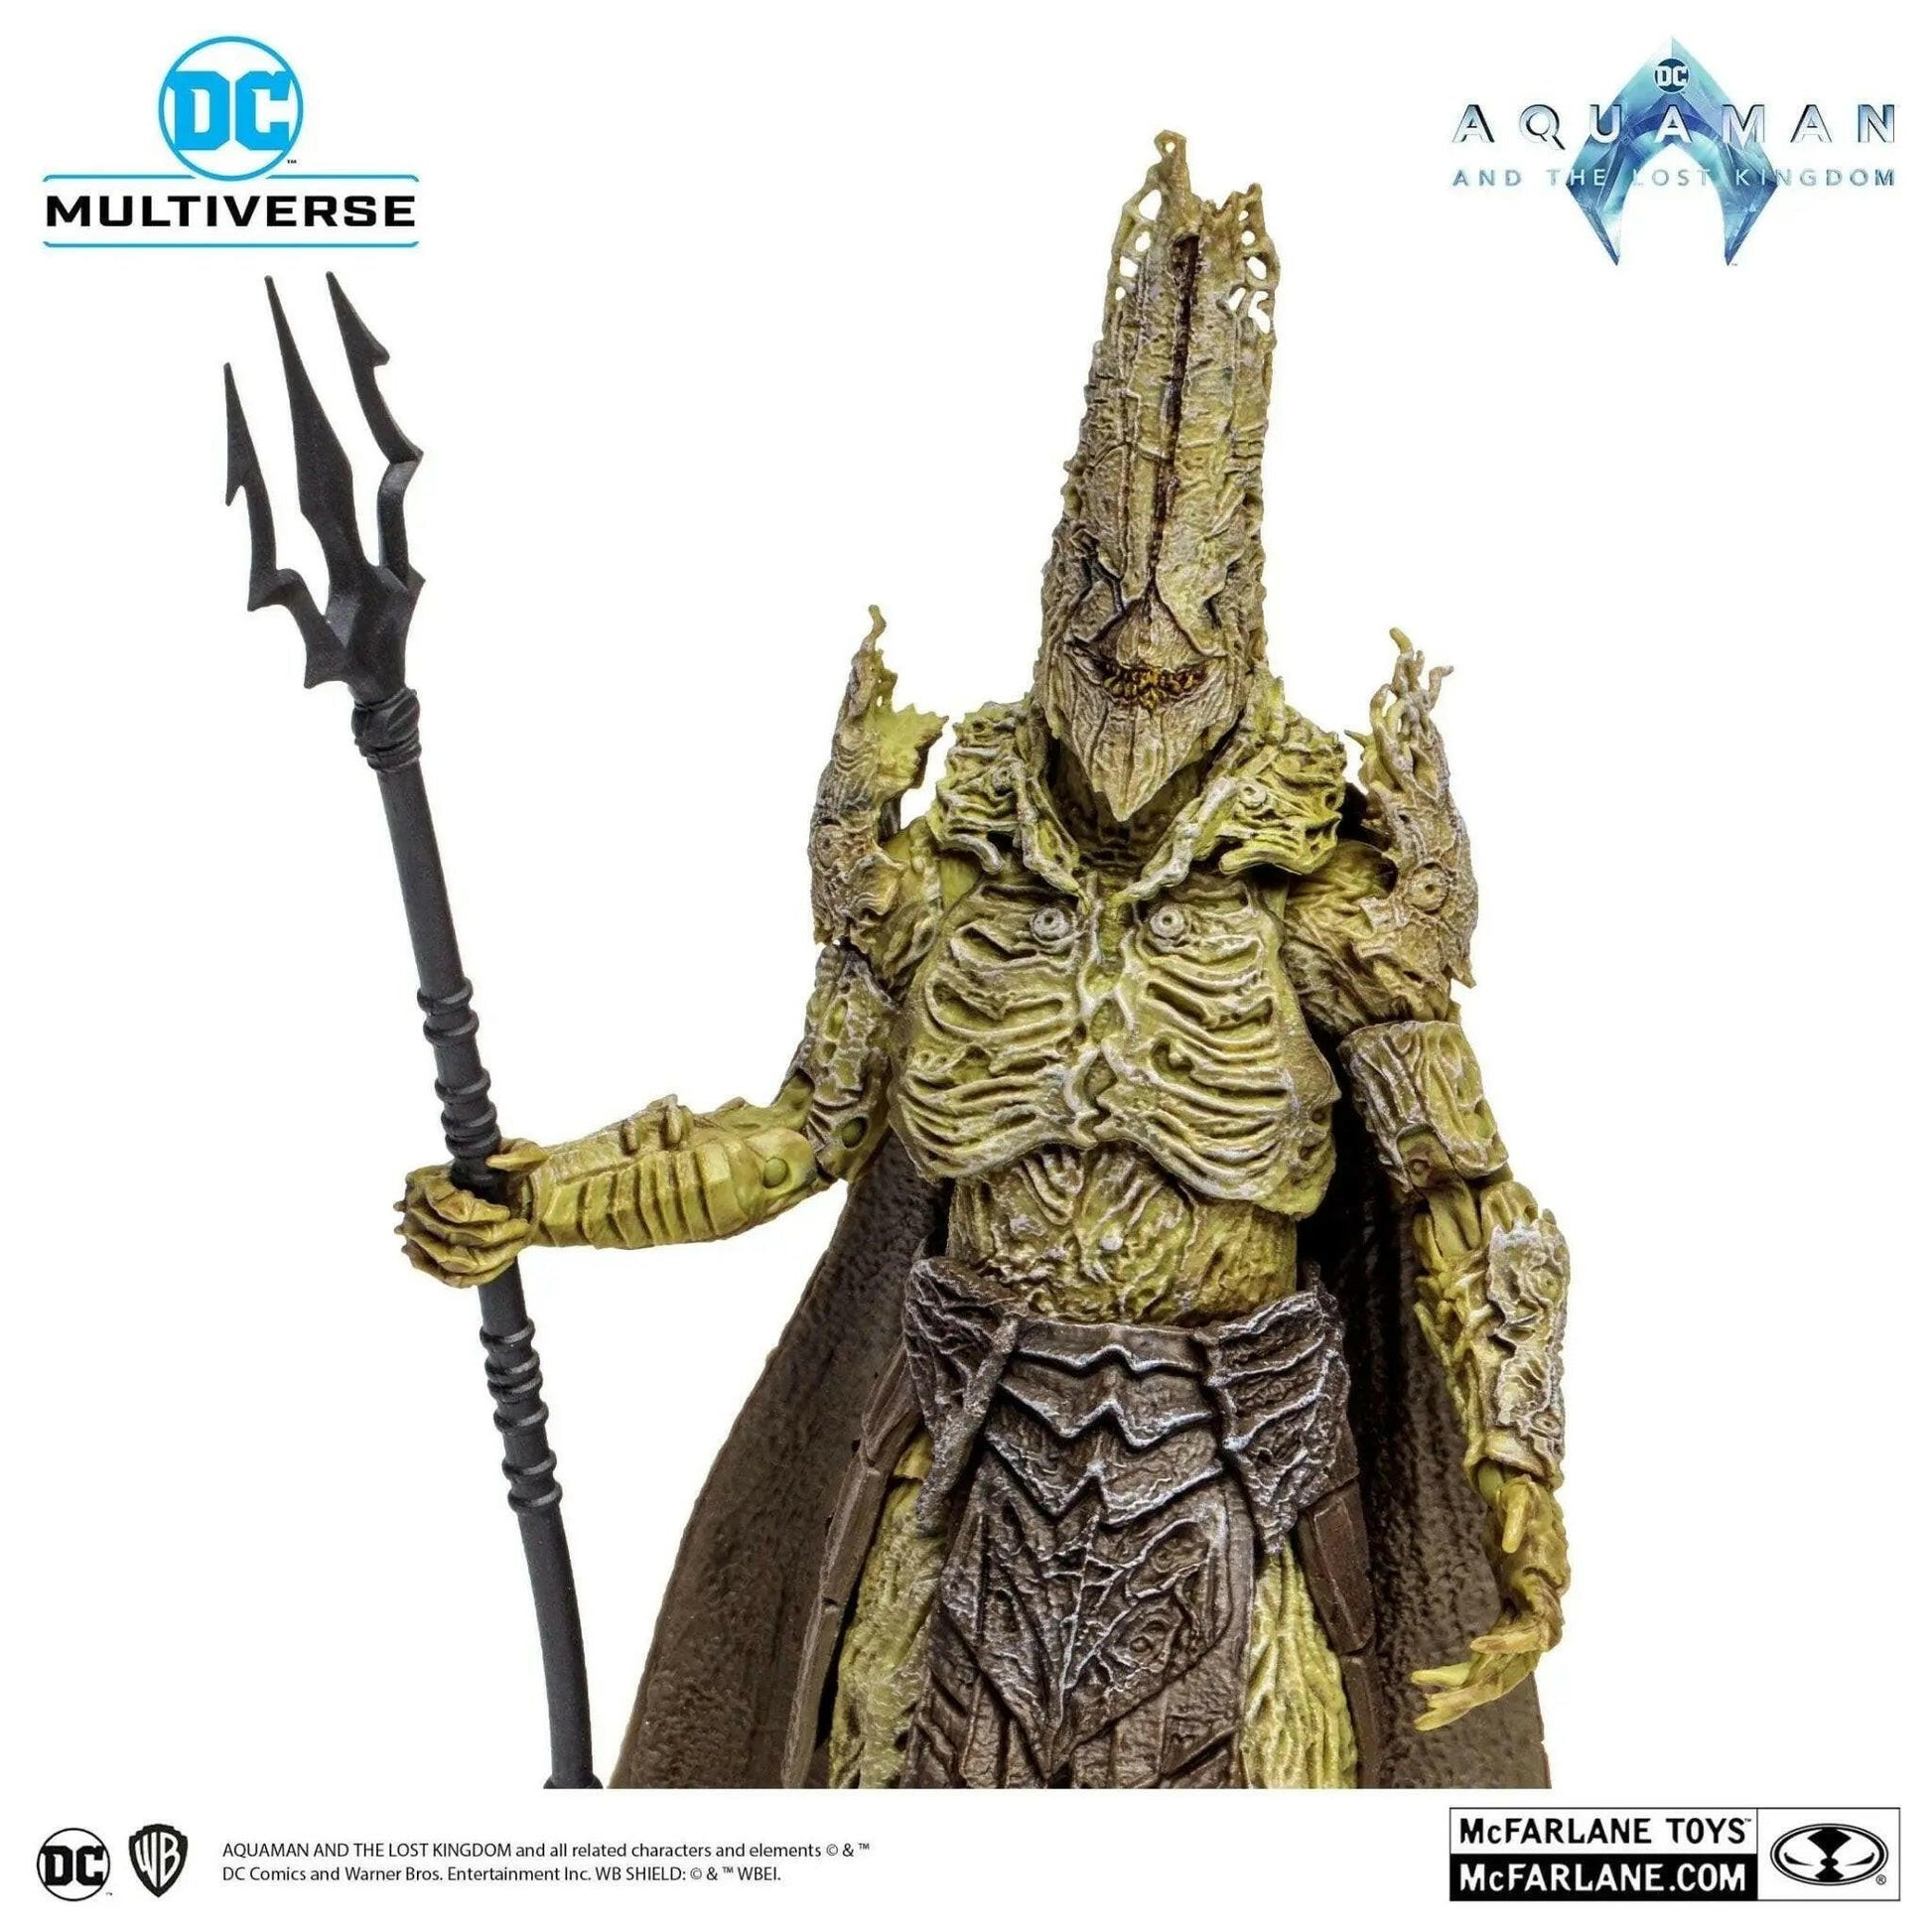 McFarlane DC Multiverse Aquaman and the Lost Kingdom Actionfigur King Kordax 18cm - Toy-Storage